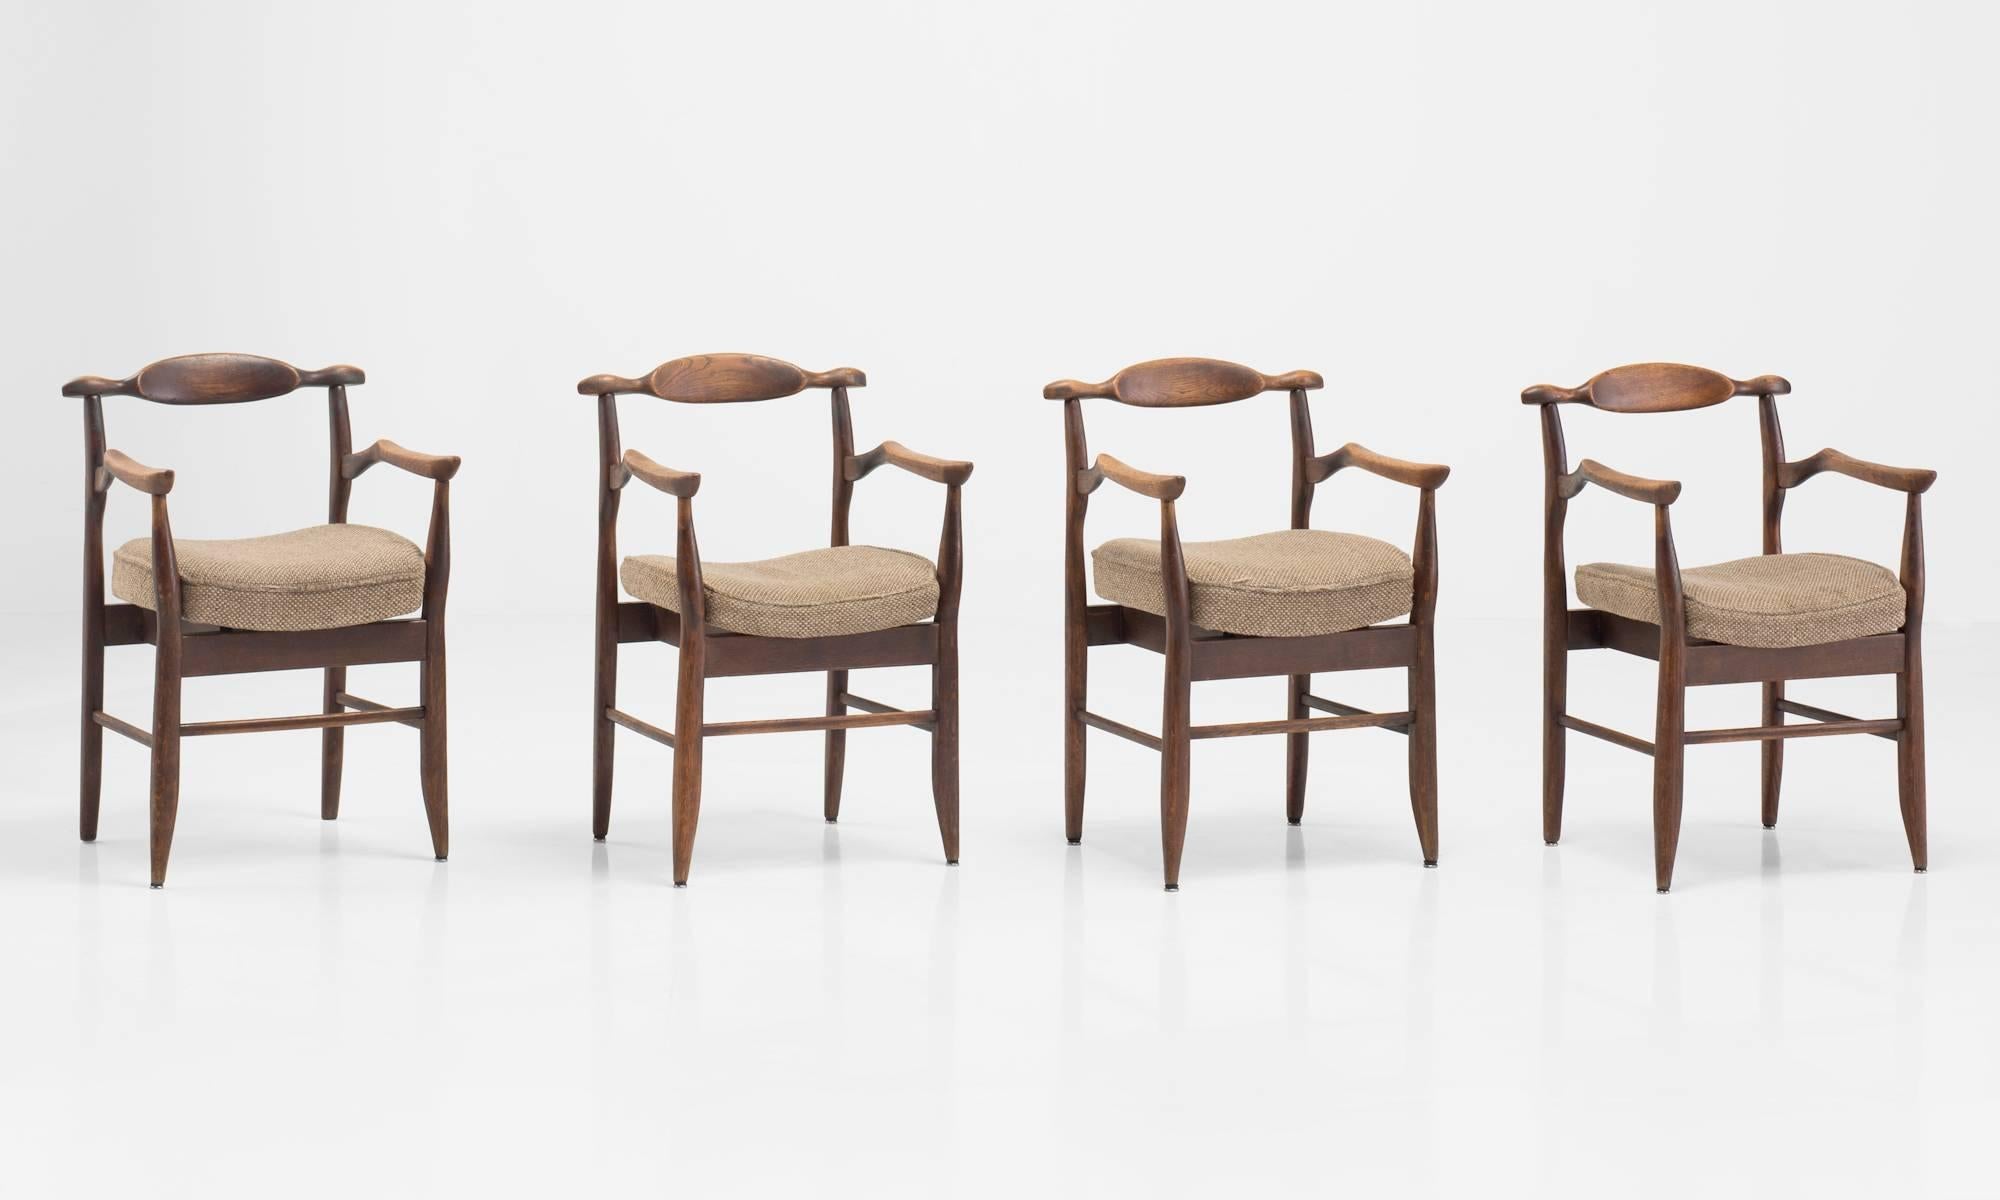 Guillerme et Chambron armchairs, circa 1960.

Oak frame with original wool upholstery, designed by Jacques Chambron and Robert Guillerme.